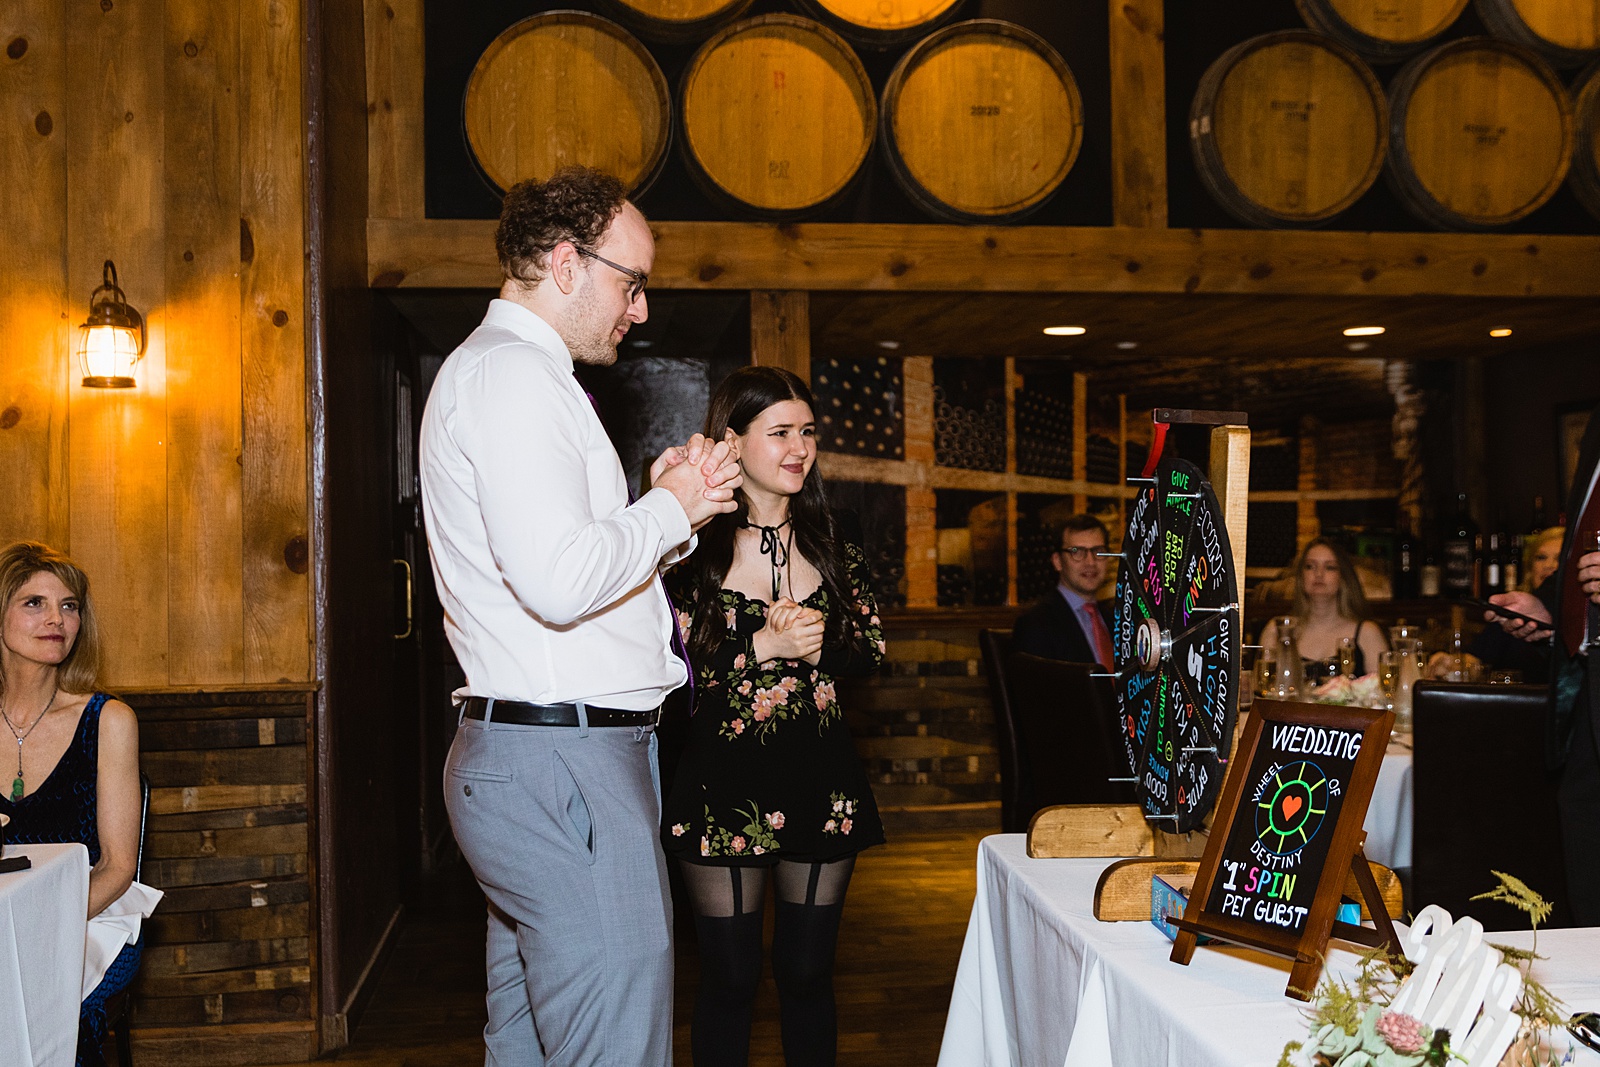 Wedding guests play spin the wheel at Timo Wood Oven Wine Bar wedding reception by Arizona wedding photographer PMA Photography.